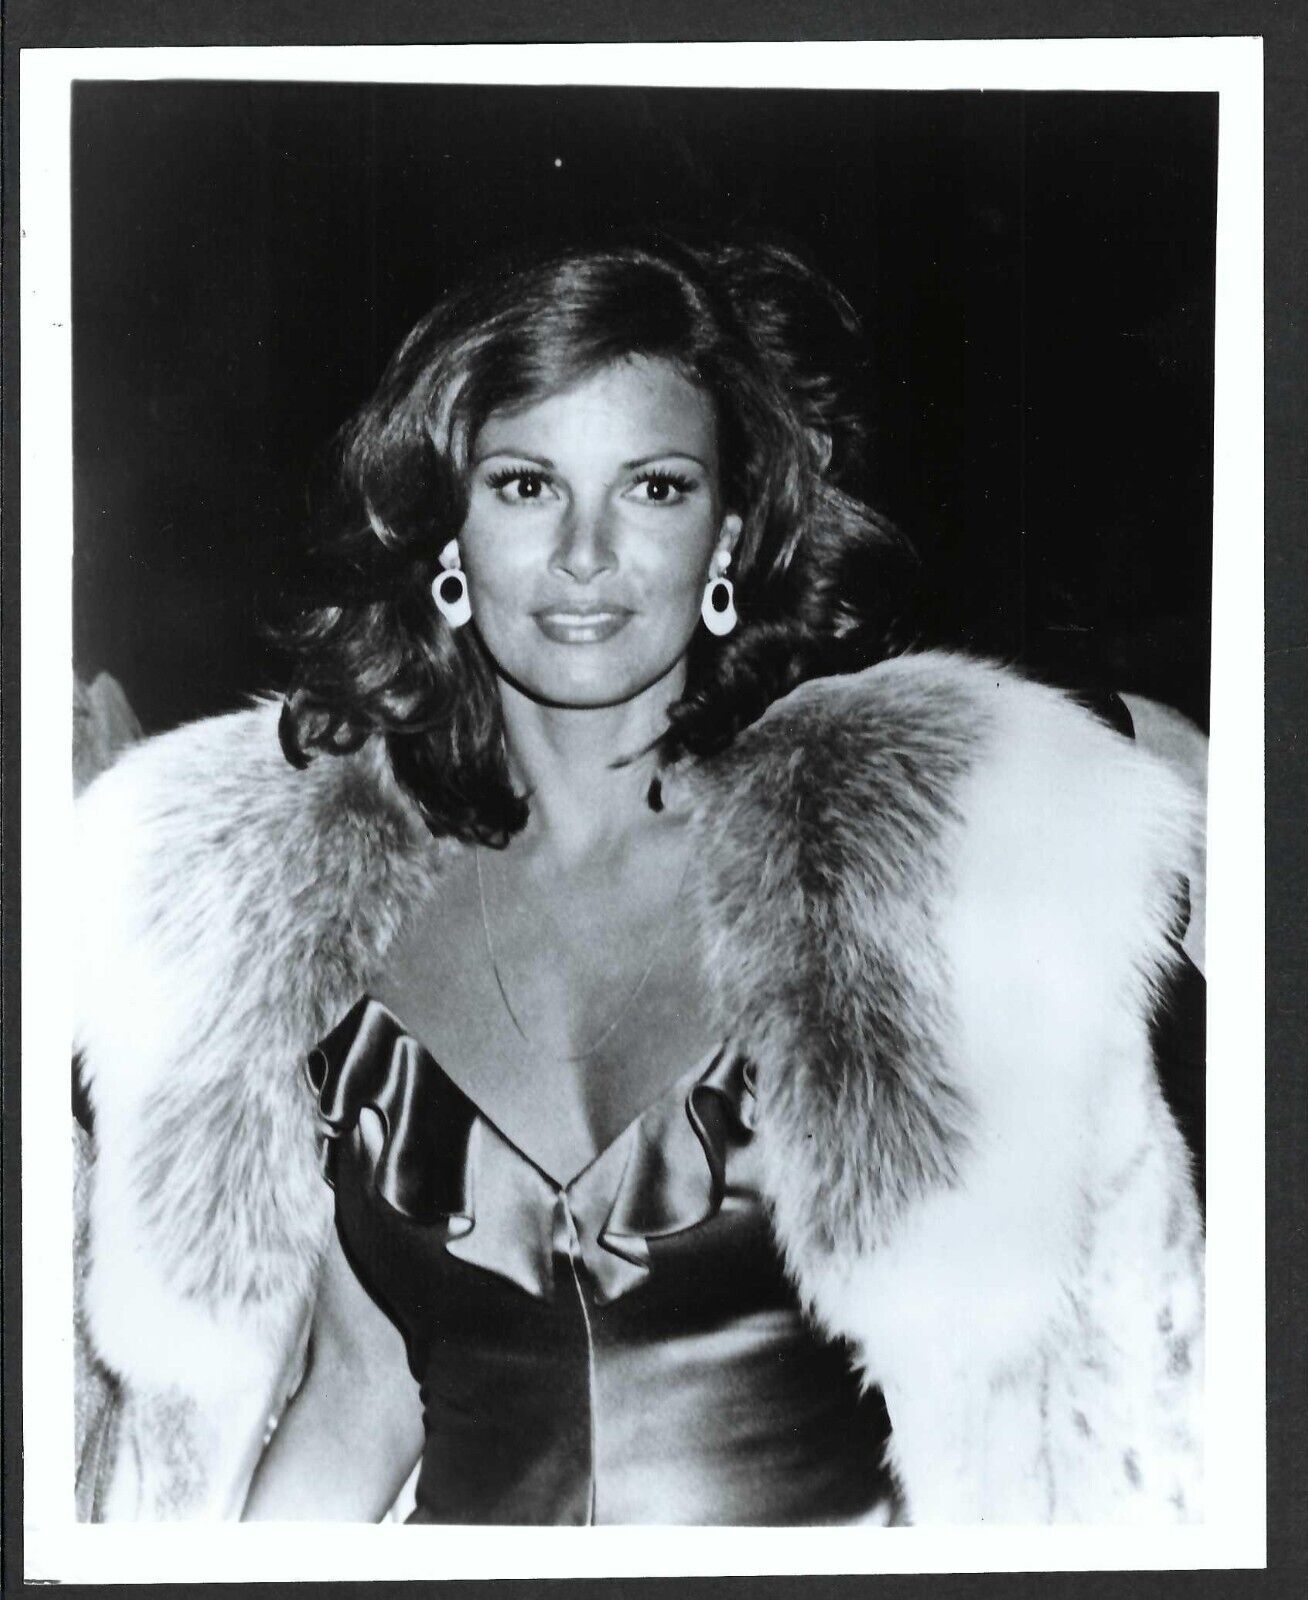 HOLLYWOOD RAQUEL WELCH ACTRESS GLAMOUR VINTAGE ORIGINAL PHOTO